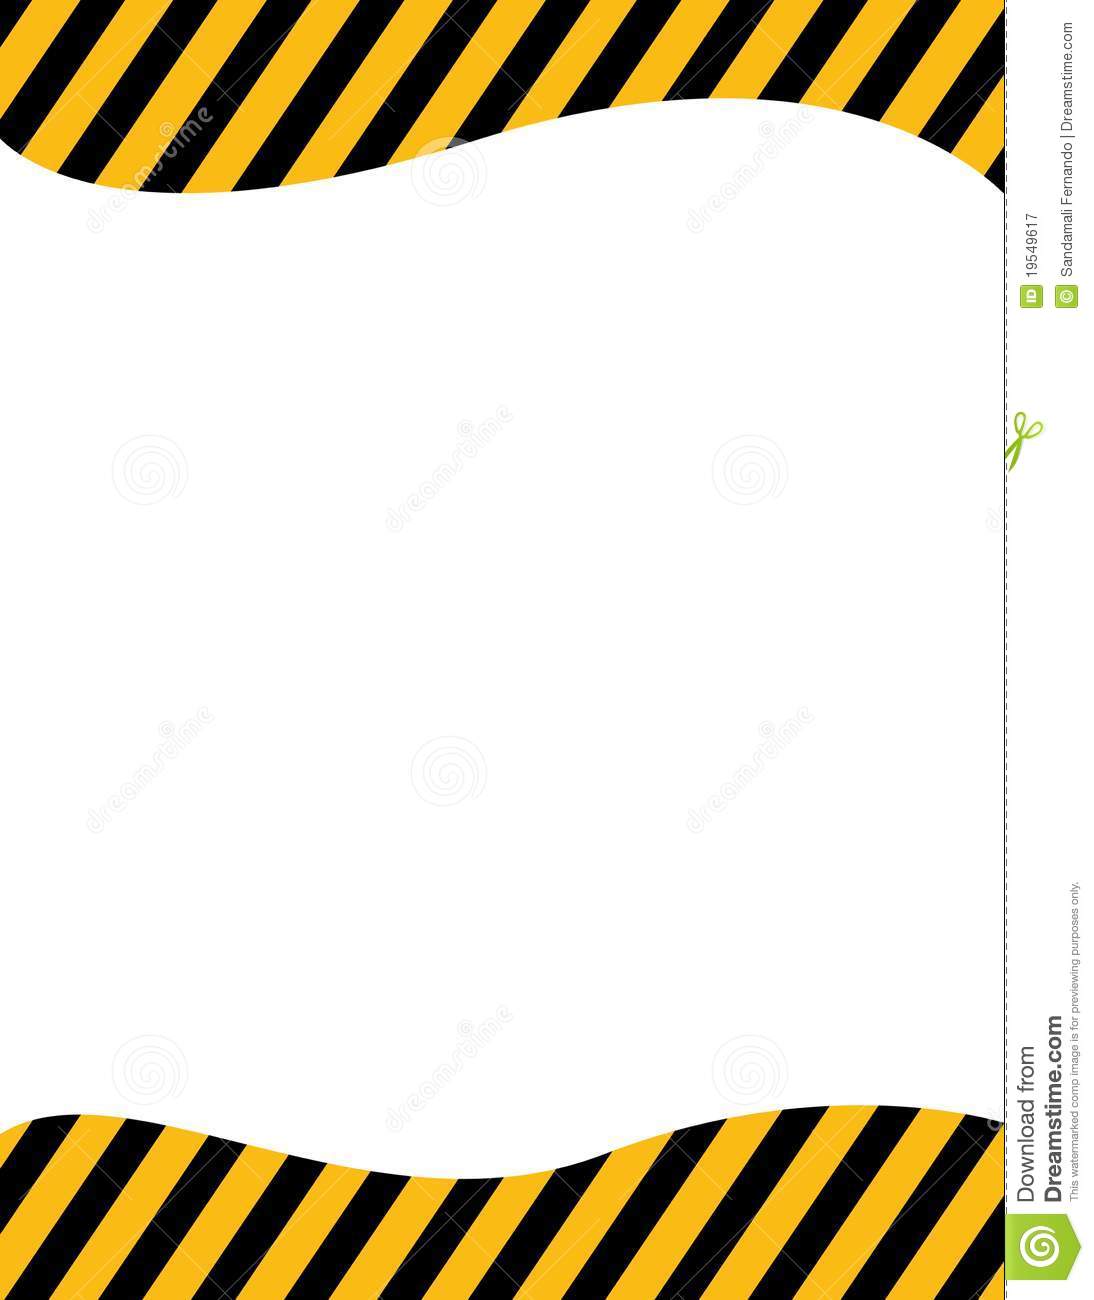     Border   Frame With Black And Yellow Stripe On White Background